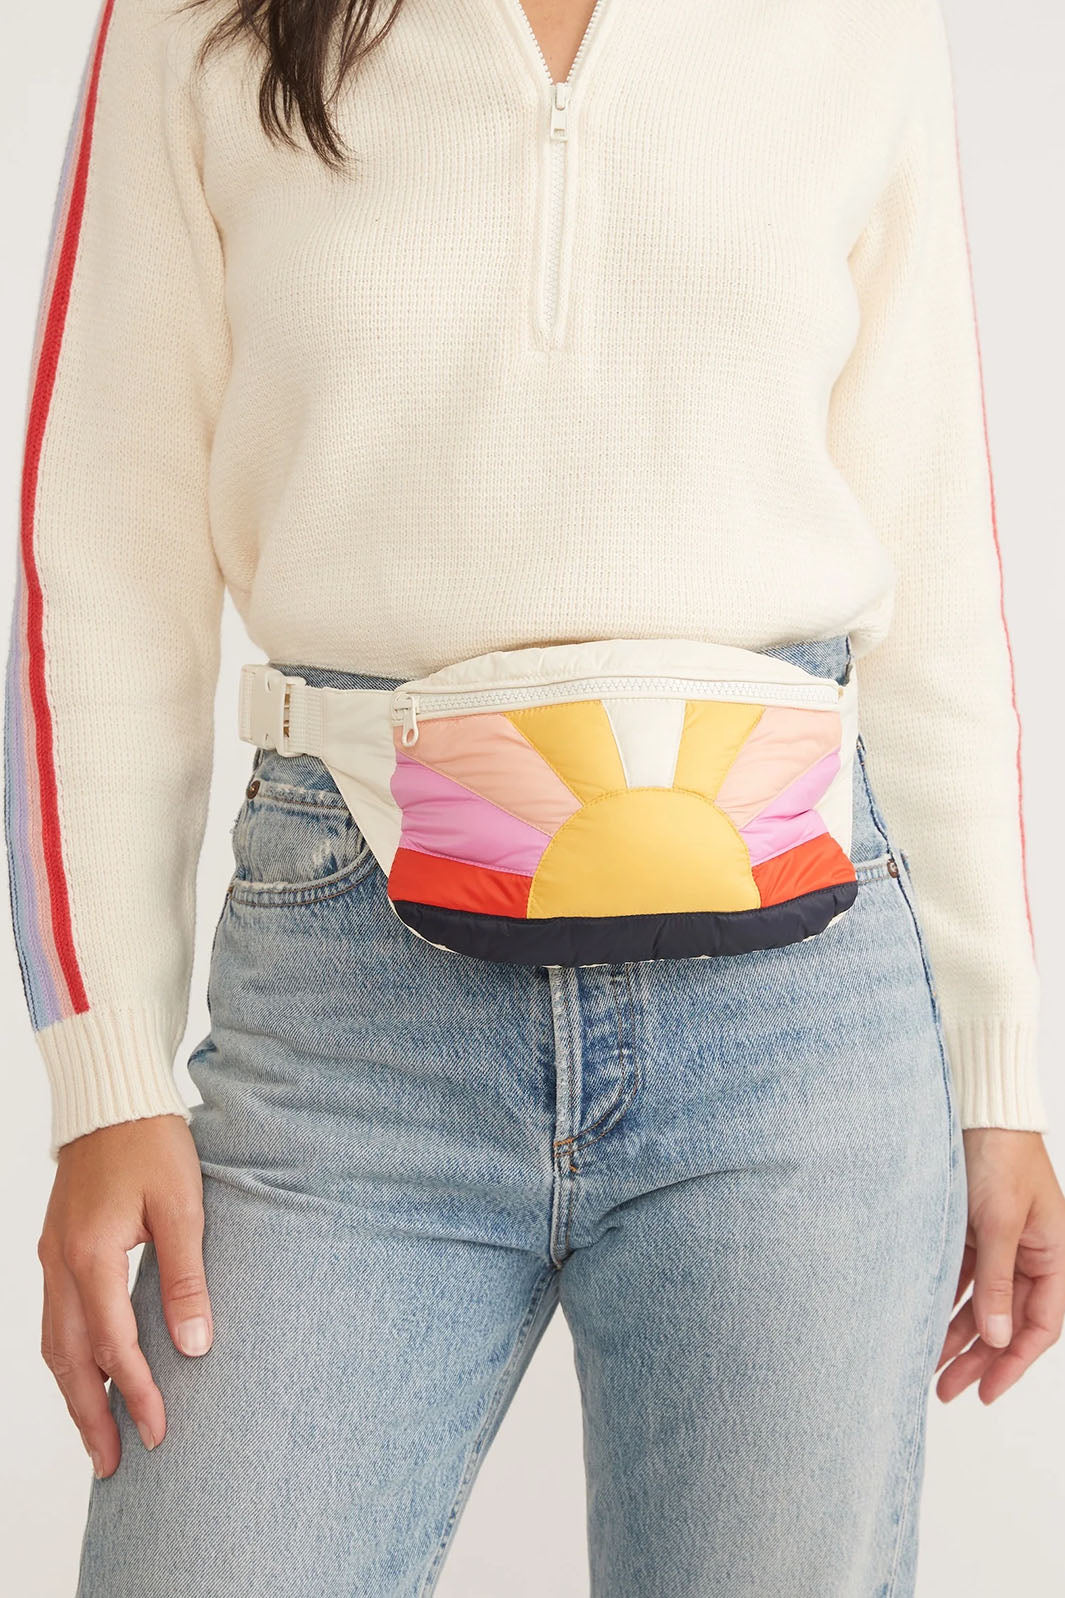 Archive Puffer Fanny Pack - Navy Sun